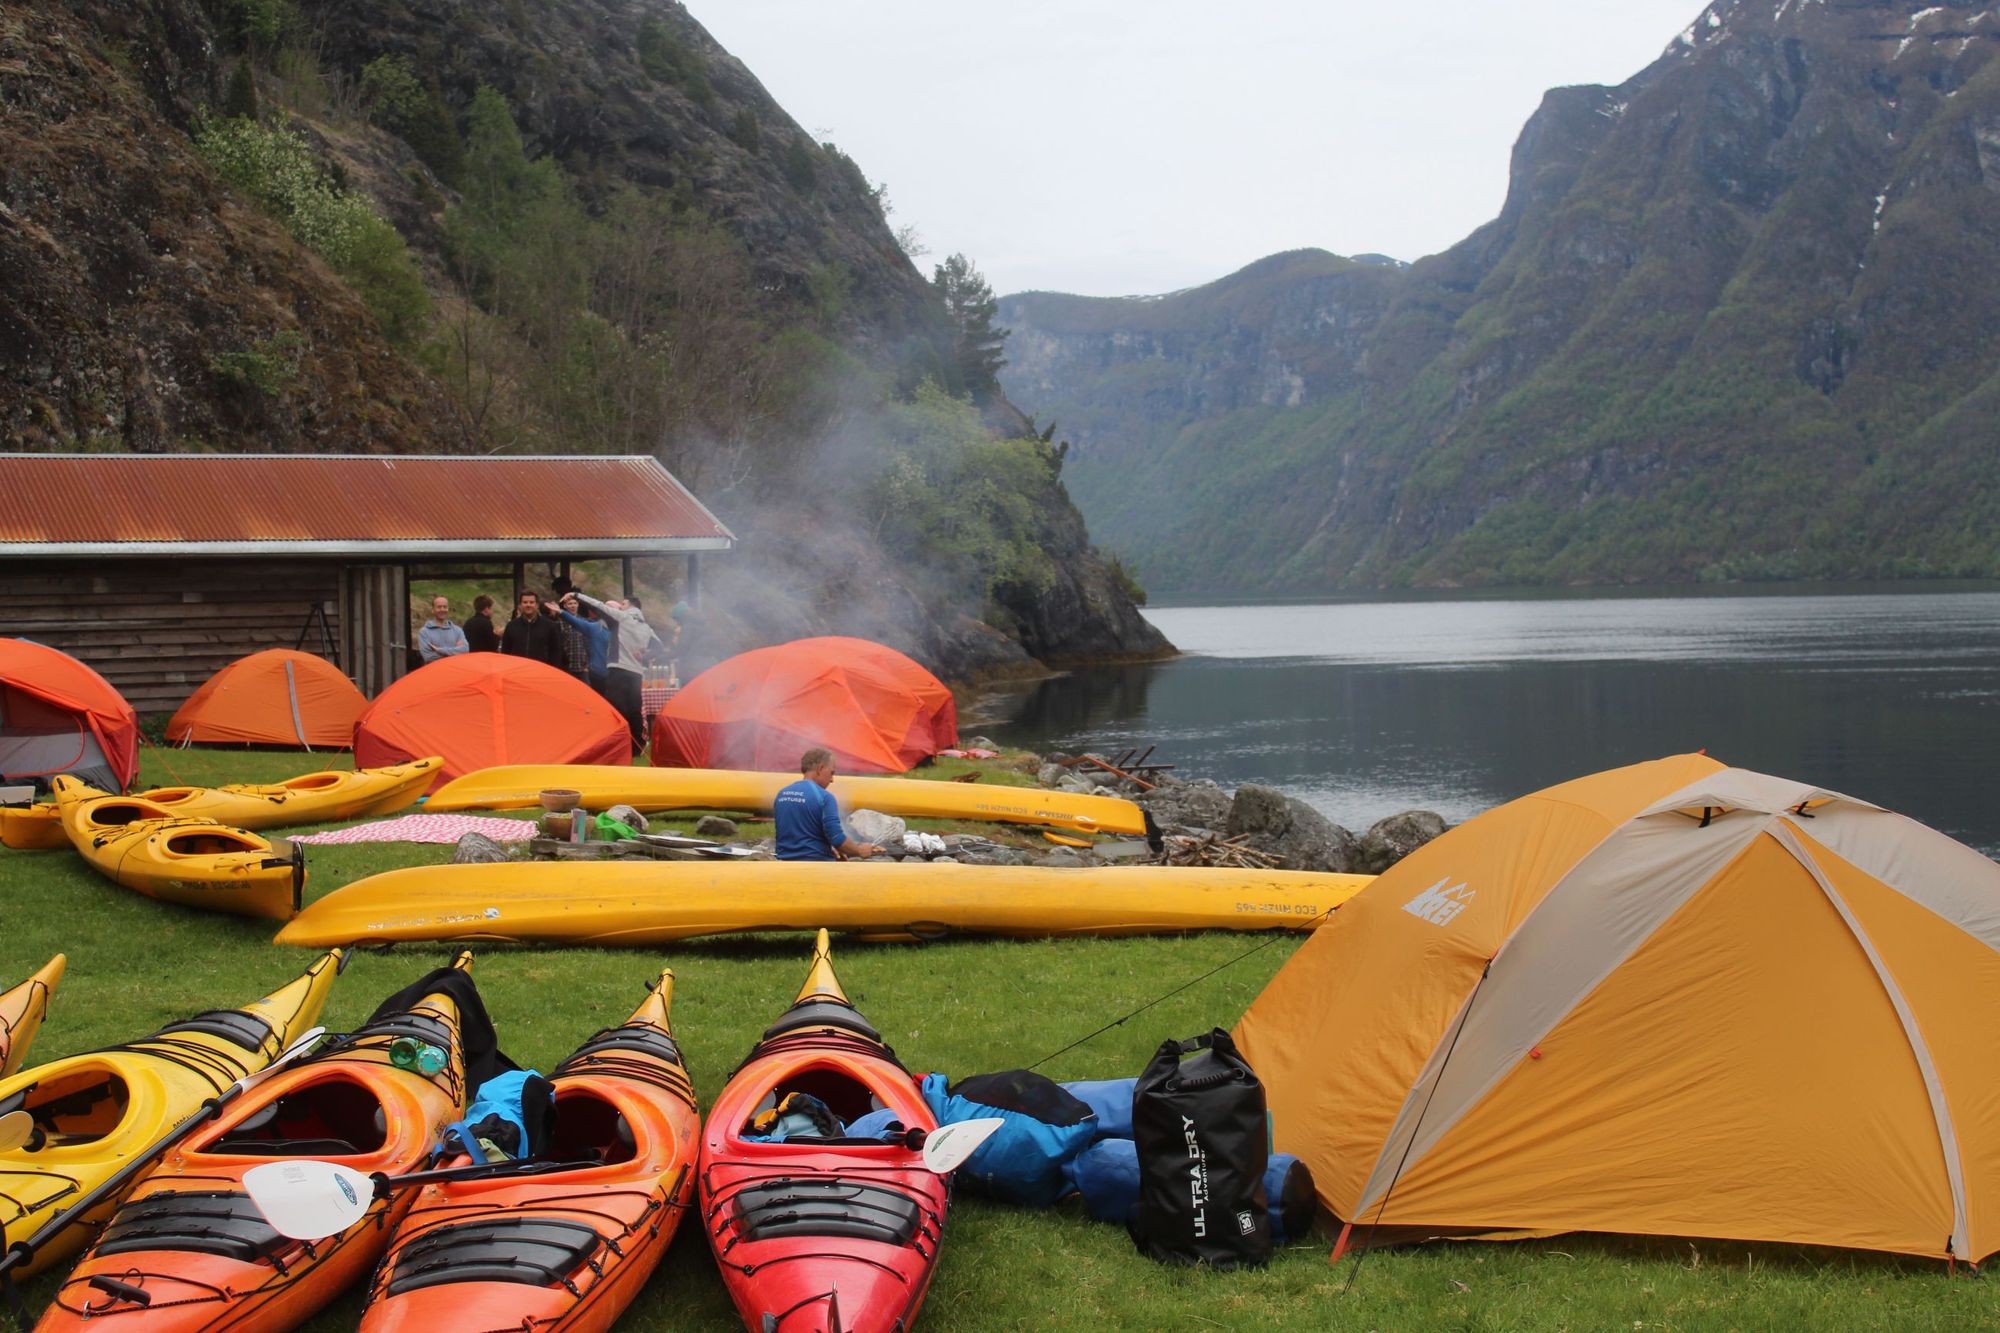 A camping spot on the edge of the Nærøyfjord, where we spent two nights.